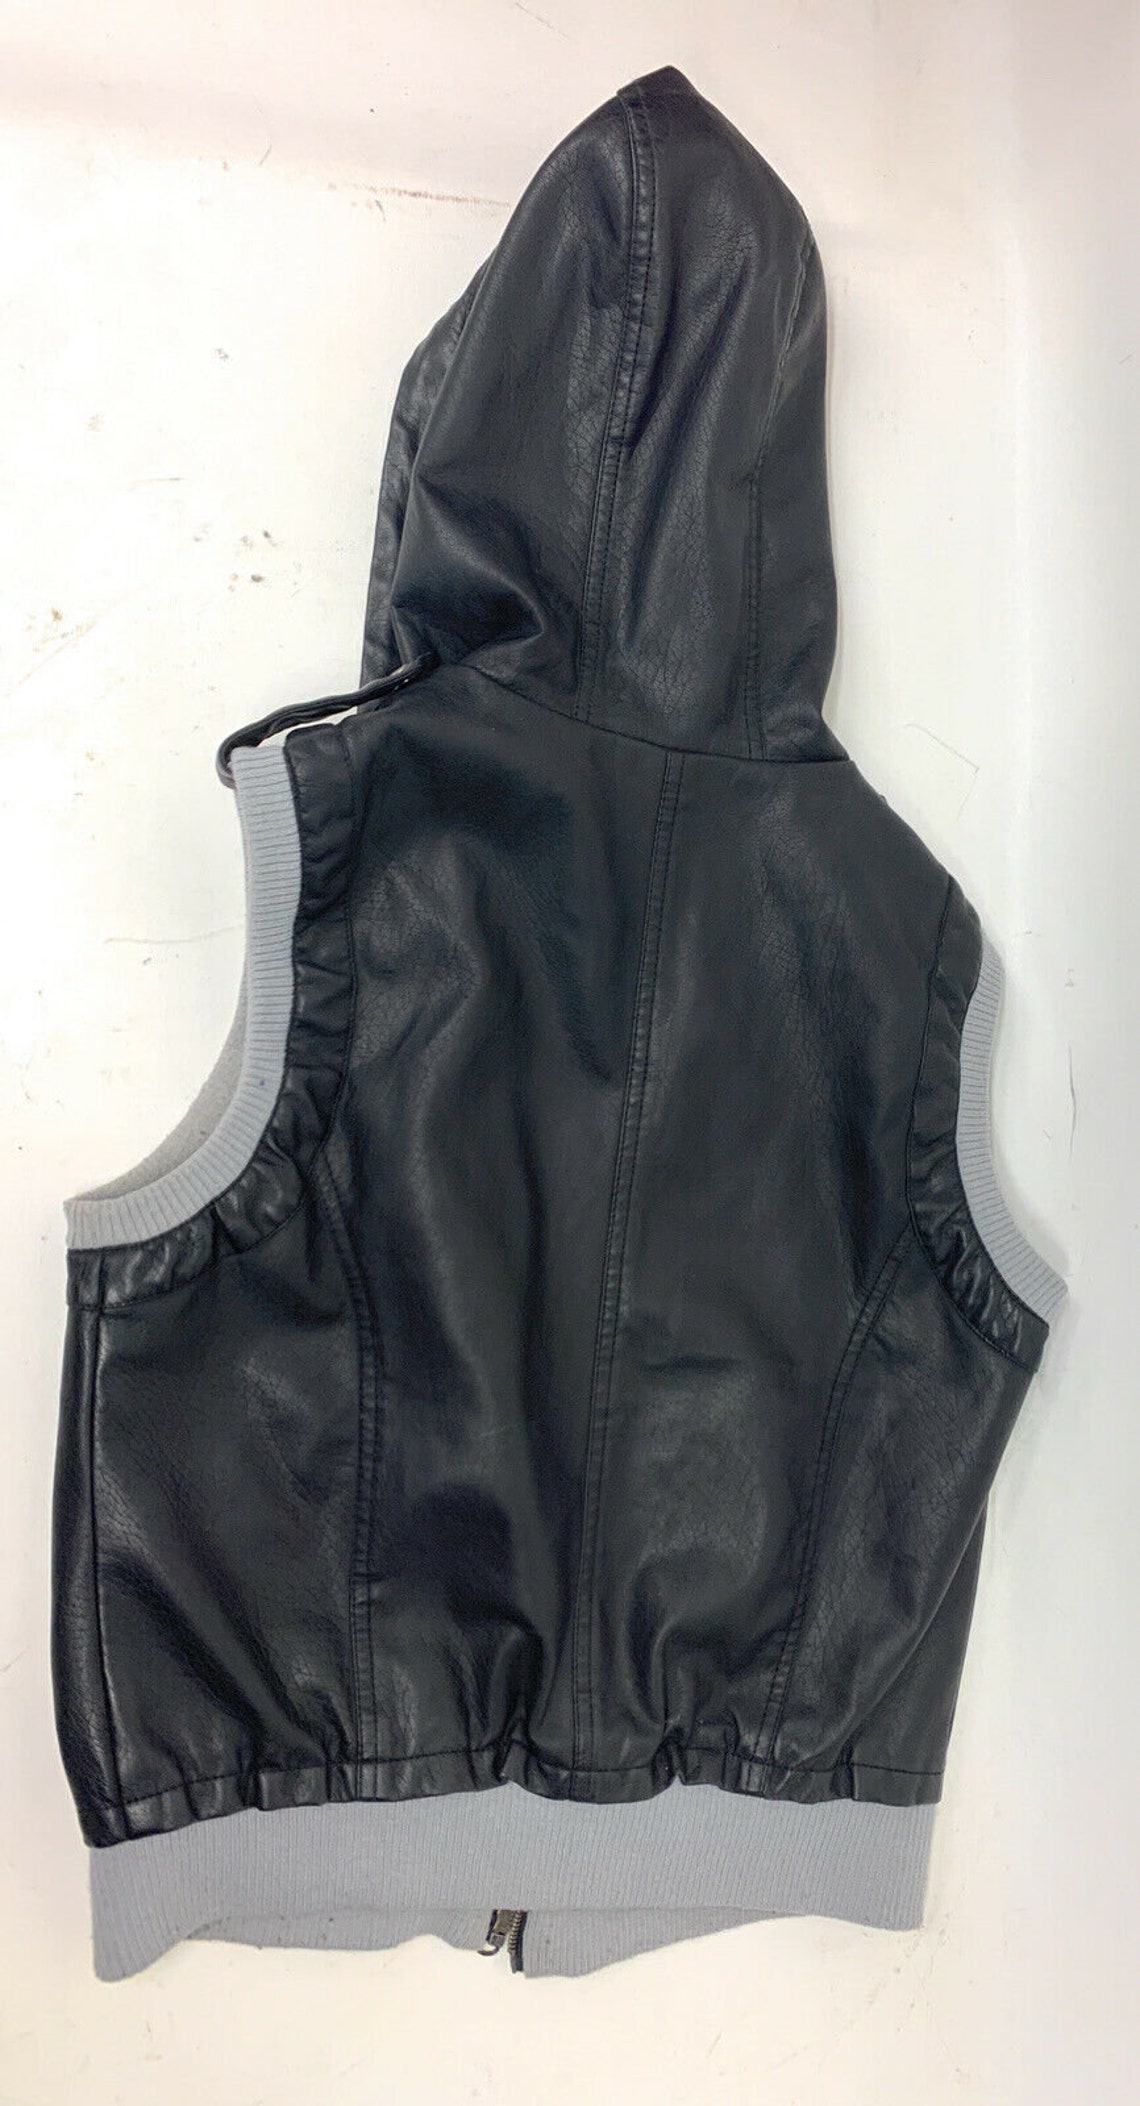 Beverly Hills Polo Club Hooded Vest Black | Etsy